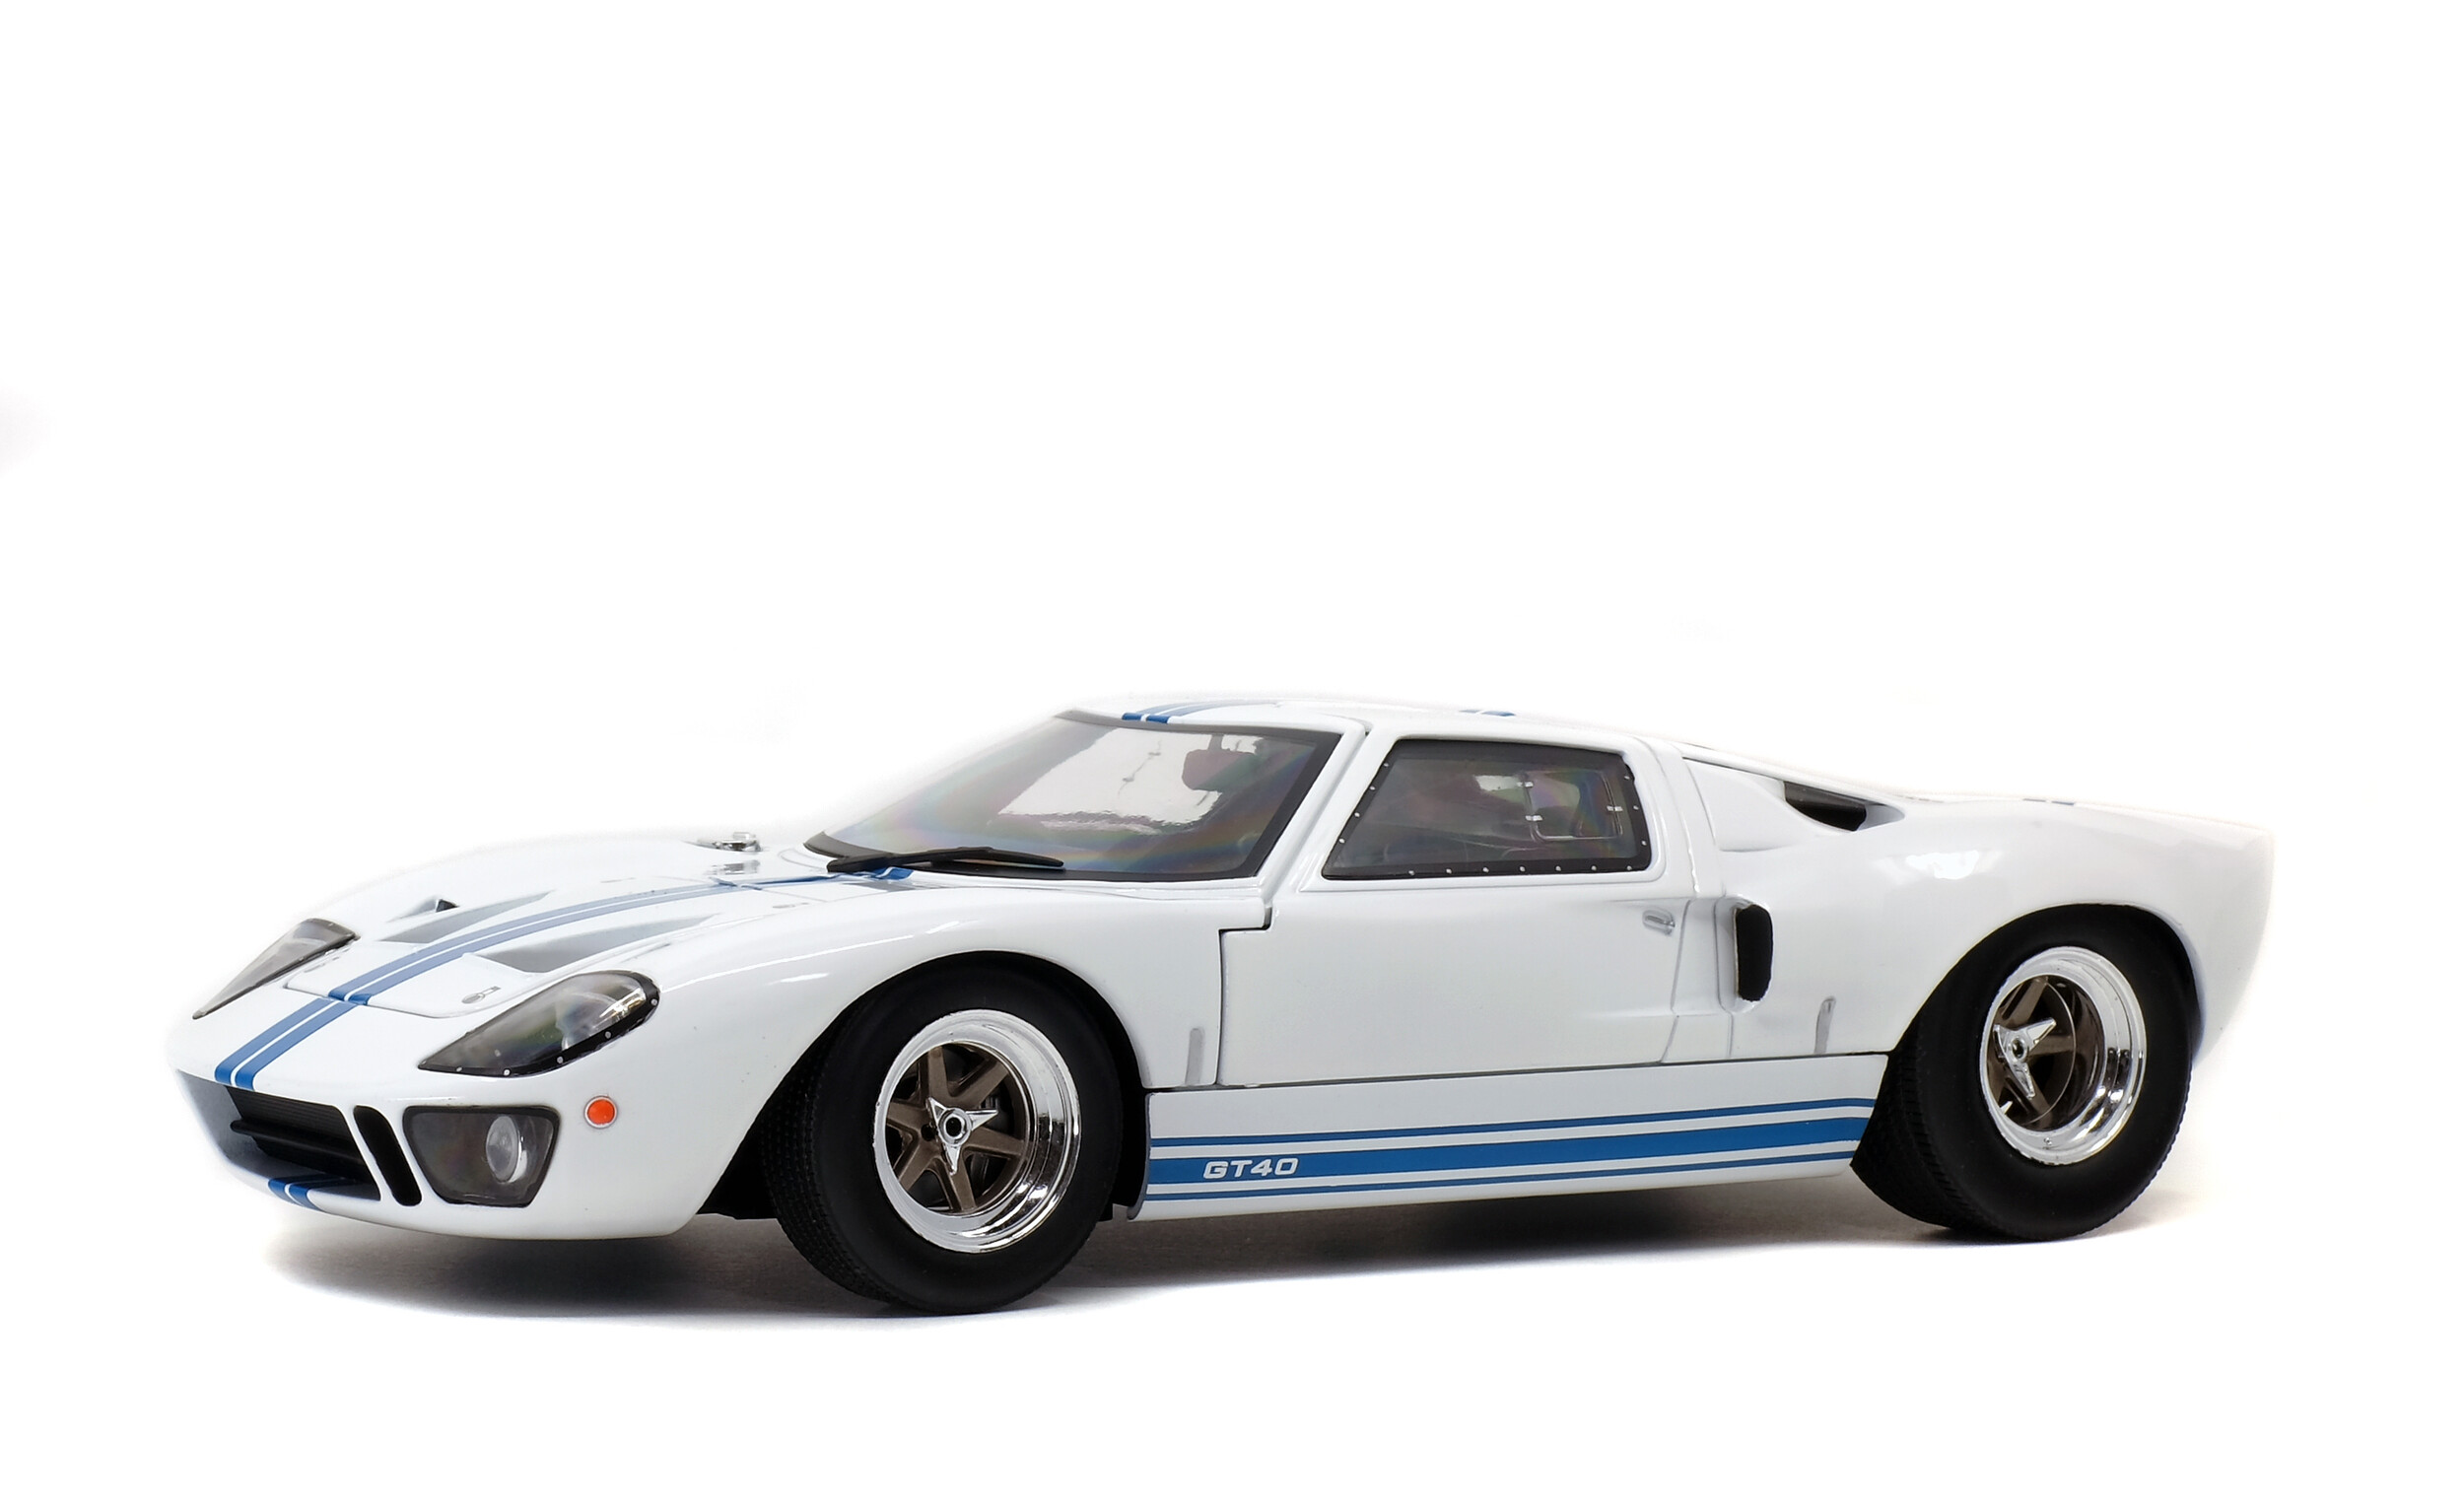 Ford Gt40 Mk1 / 1966 Ford GT40 MK1 | Fast Lane Classic Cars : Gt40 ...